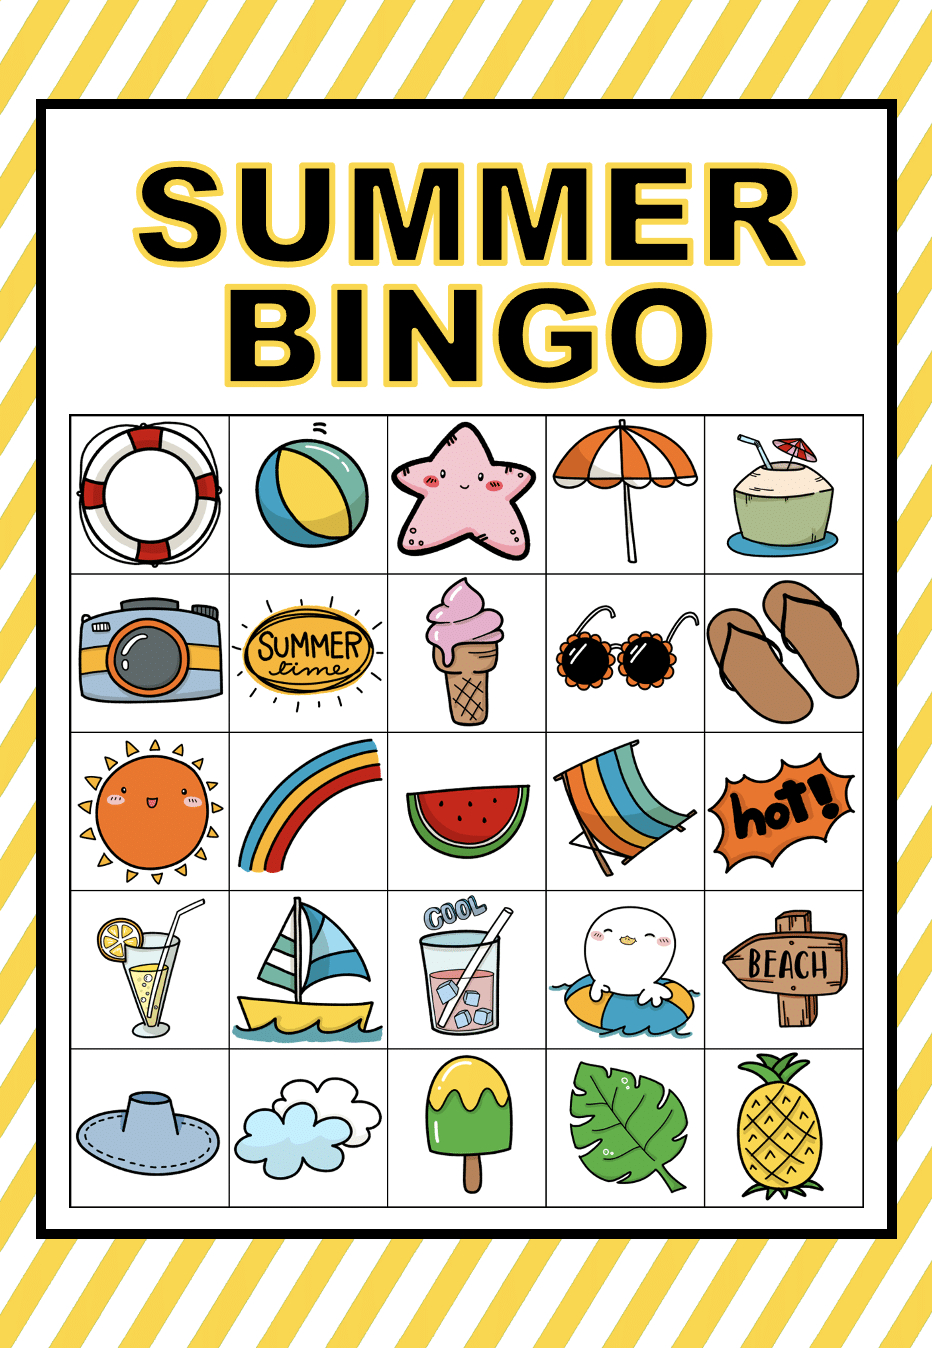 Free Printable Picture Bingo Cards (Summer Edition) - We Made This for Free Bingo Printable